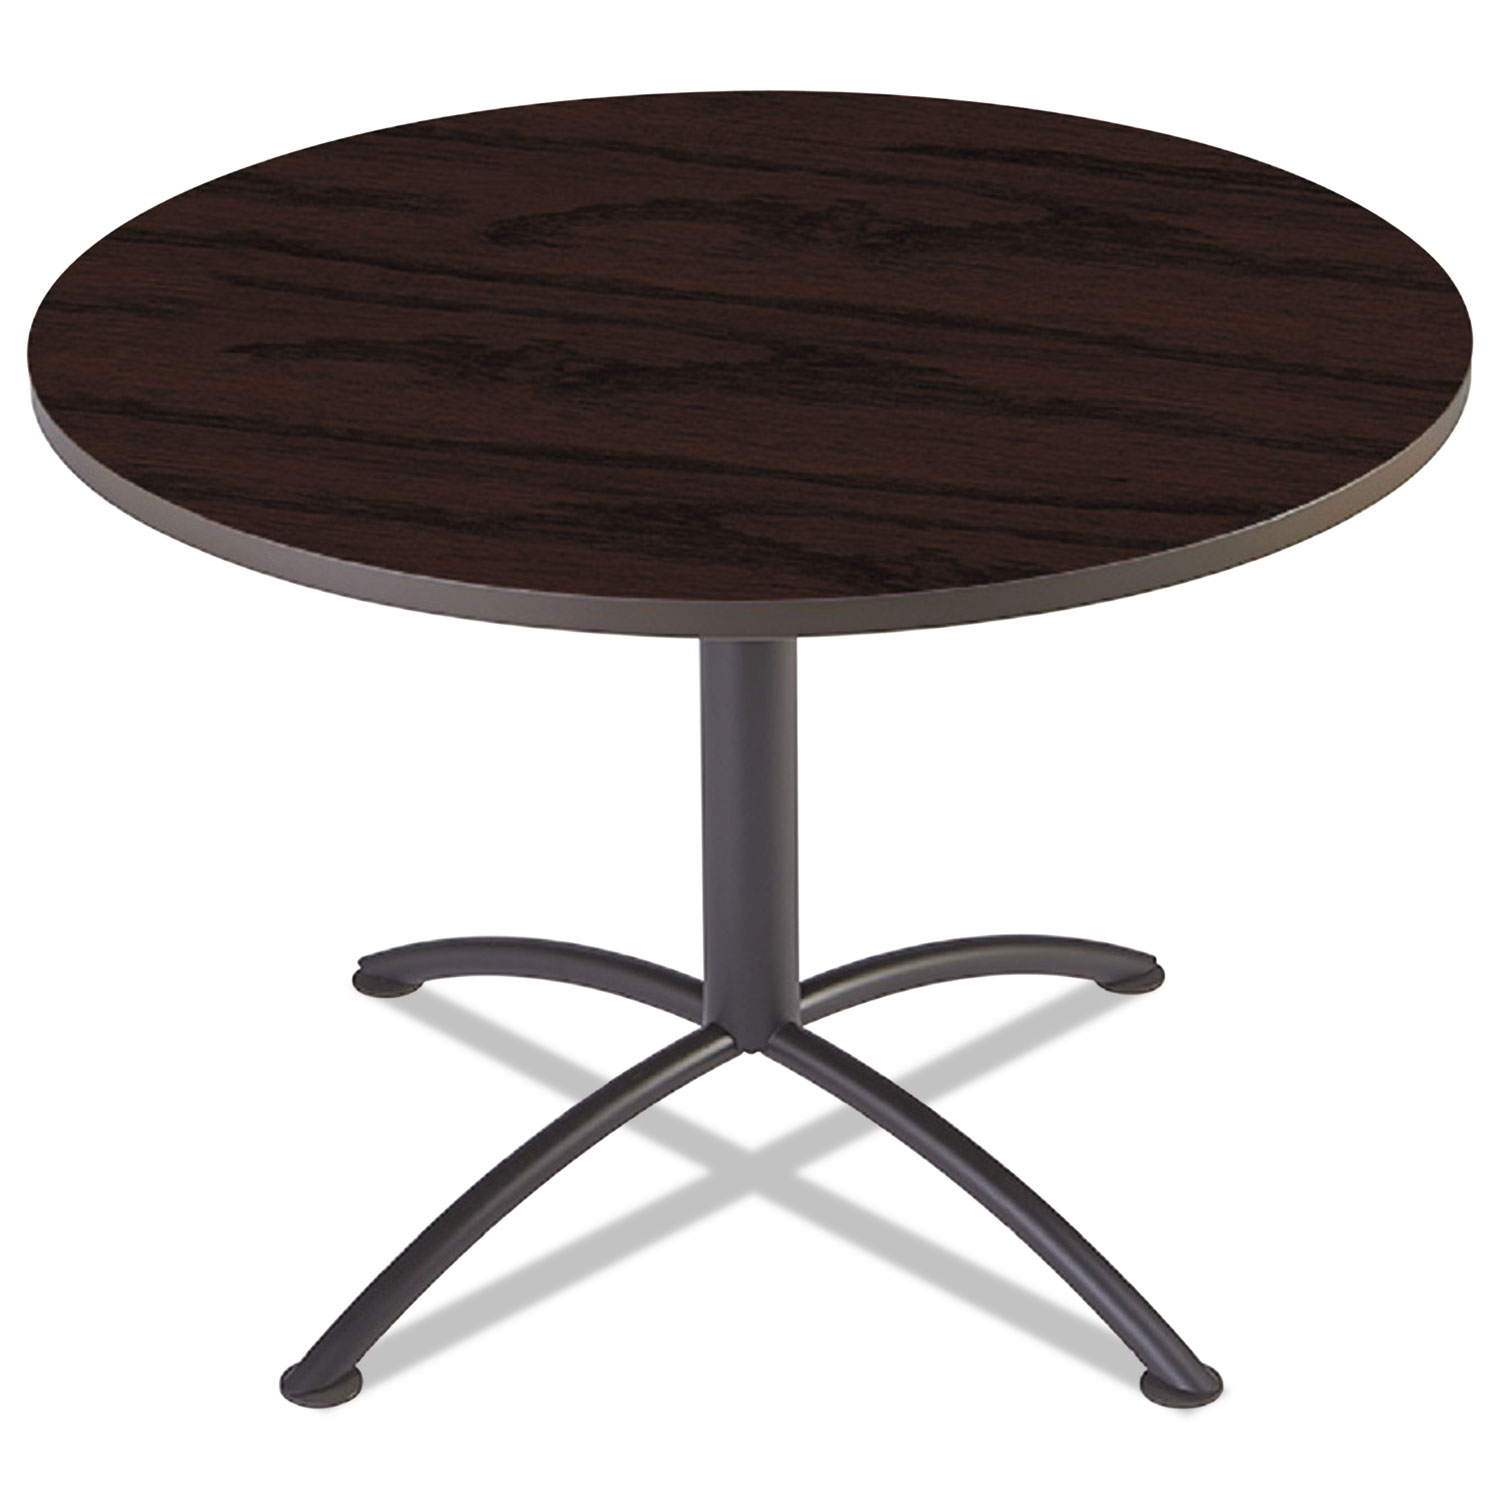 iLand Table, Contour, Round Seated Style, 42